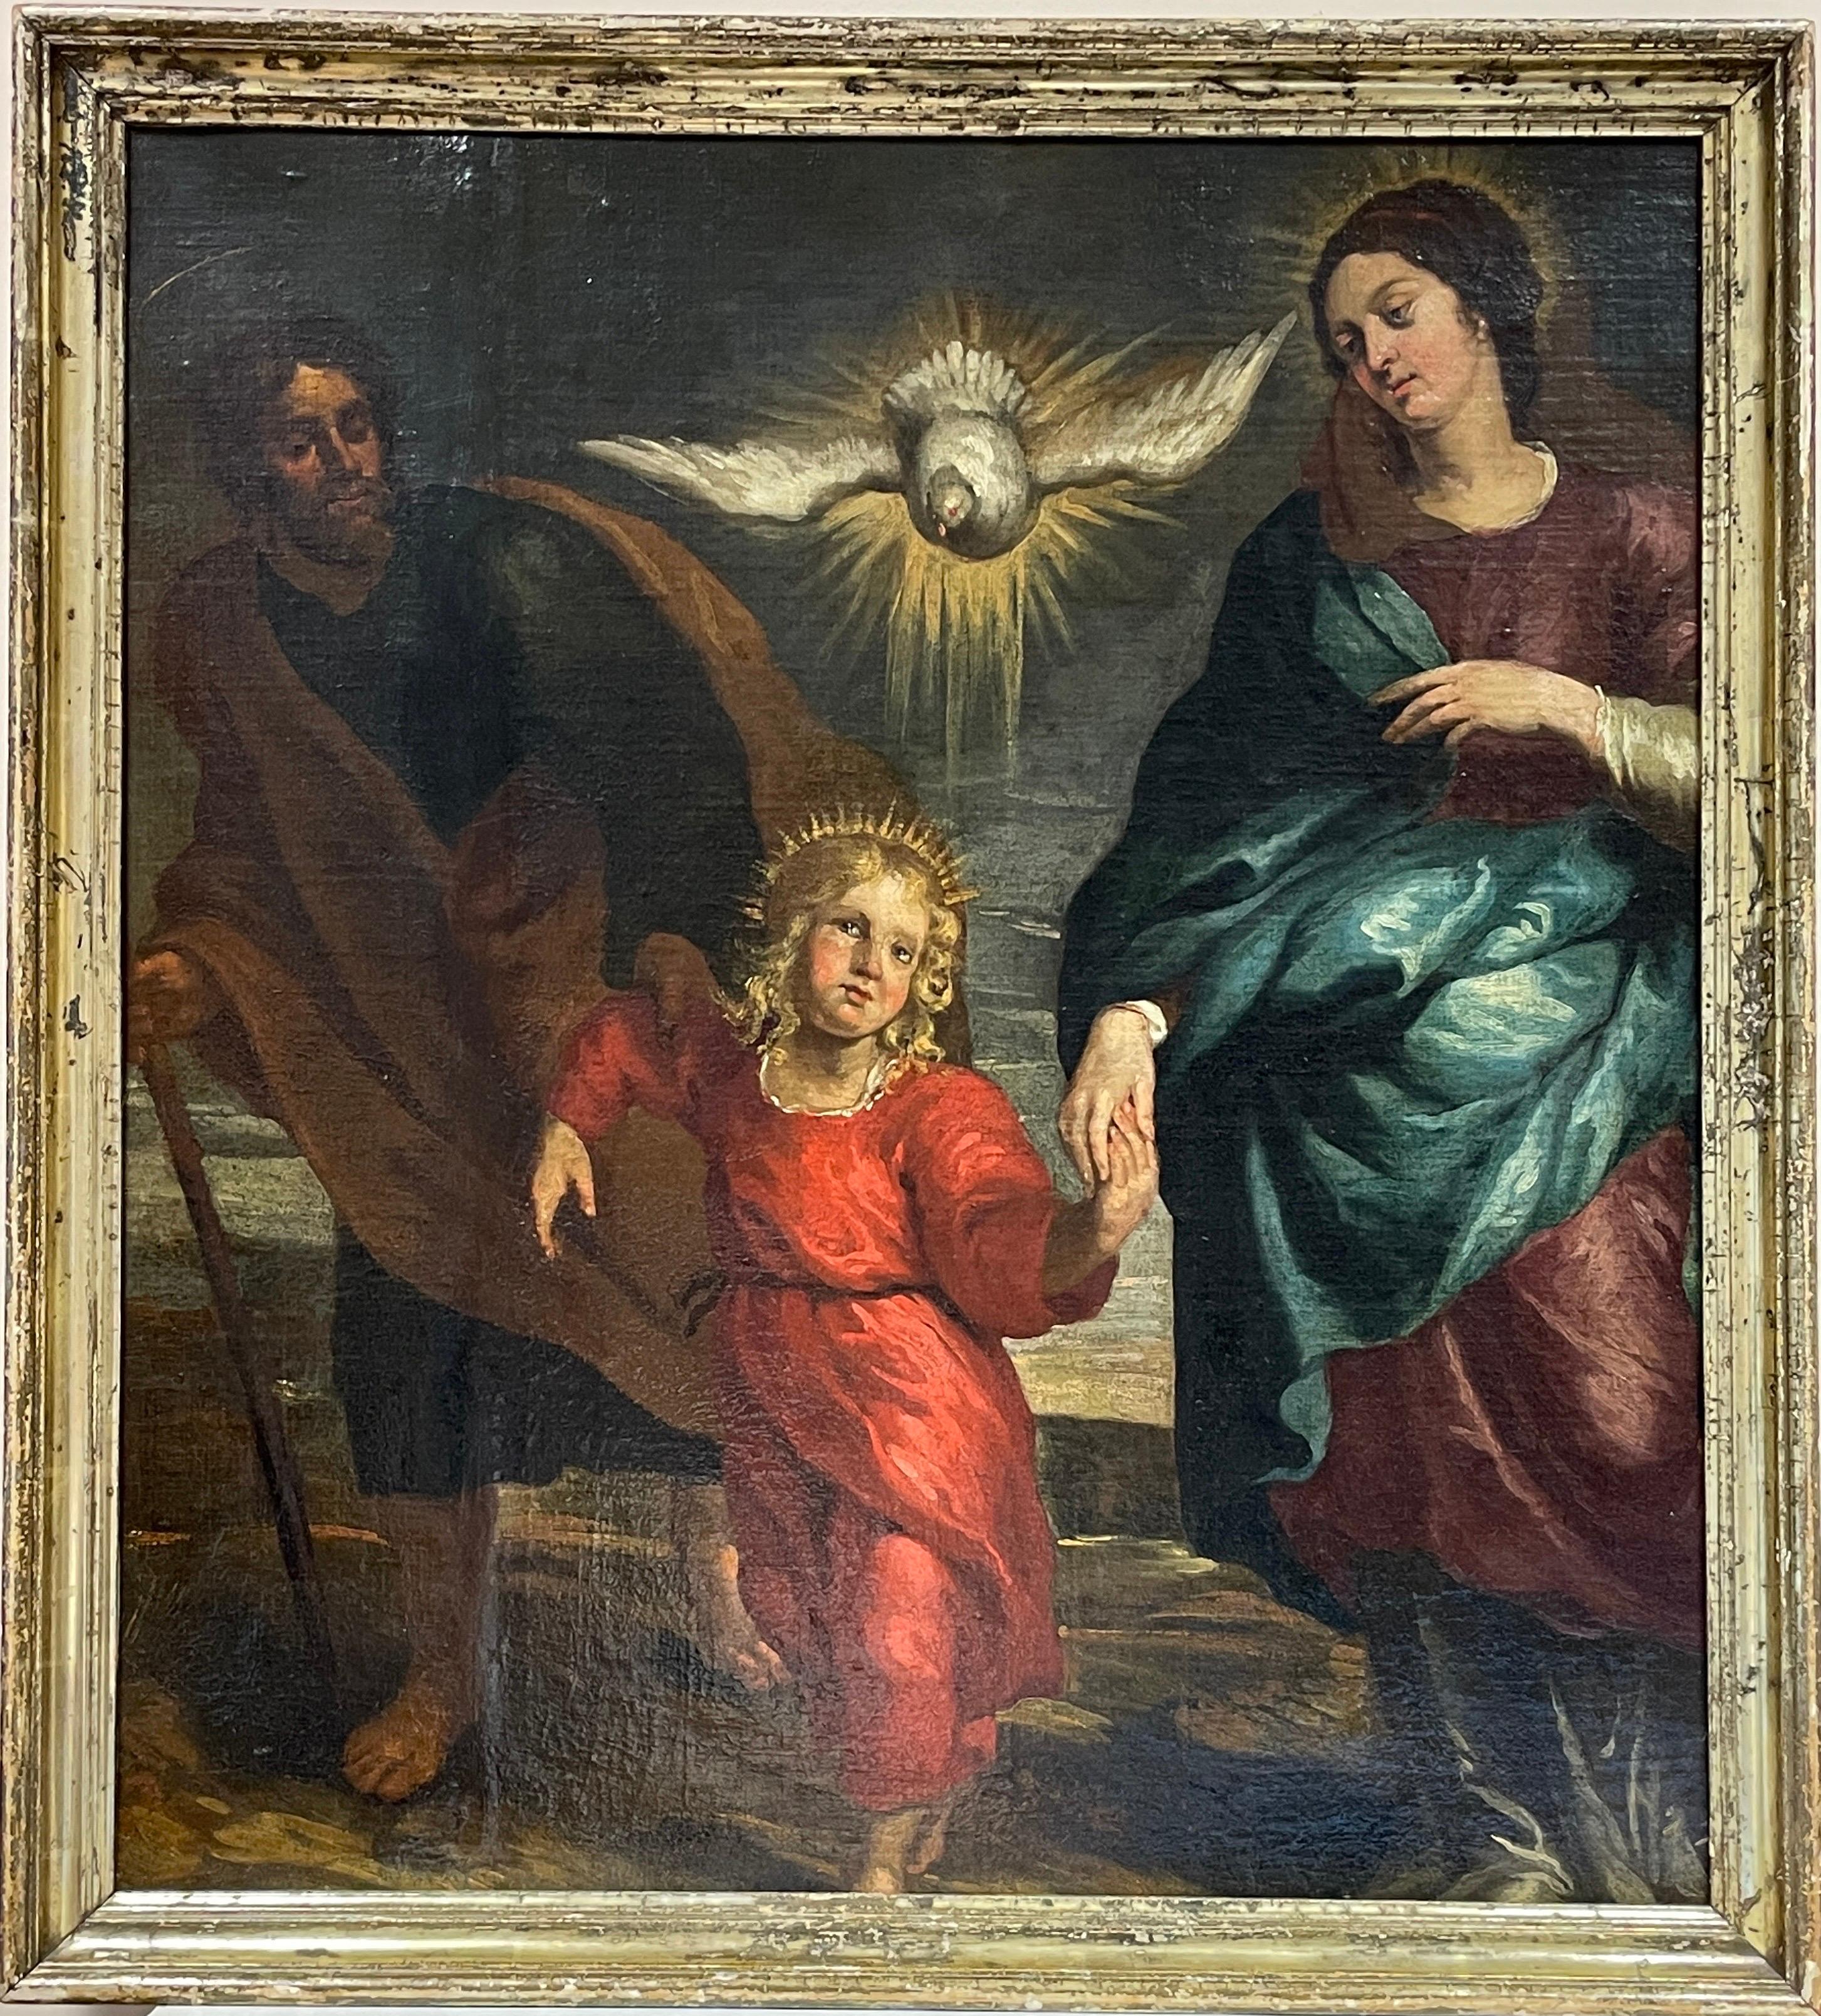 The Holy Family, Large 17th Century Italian Old Master Oil Painting - Black Figurative Painting by 17th Italian Old Master